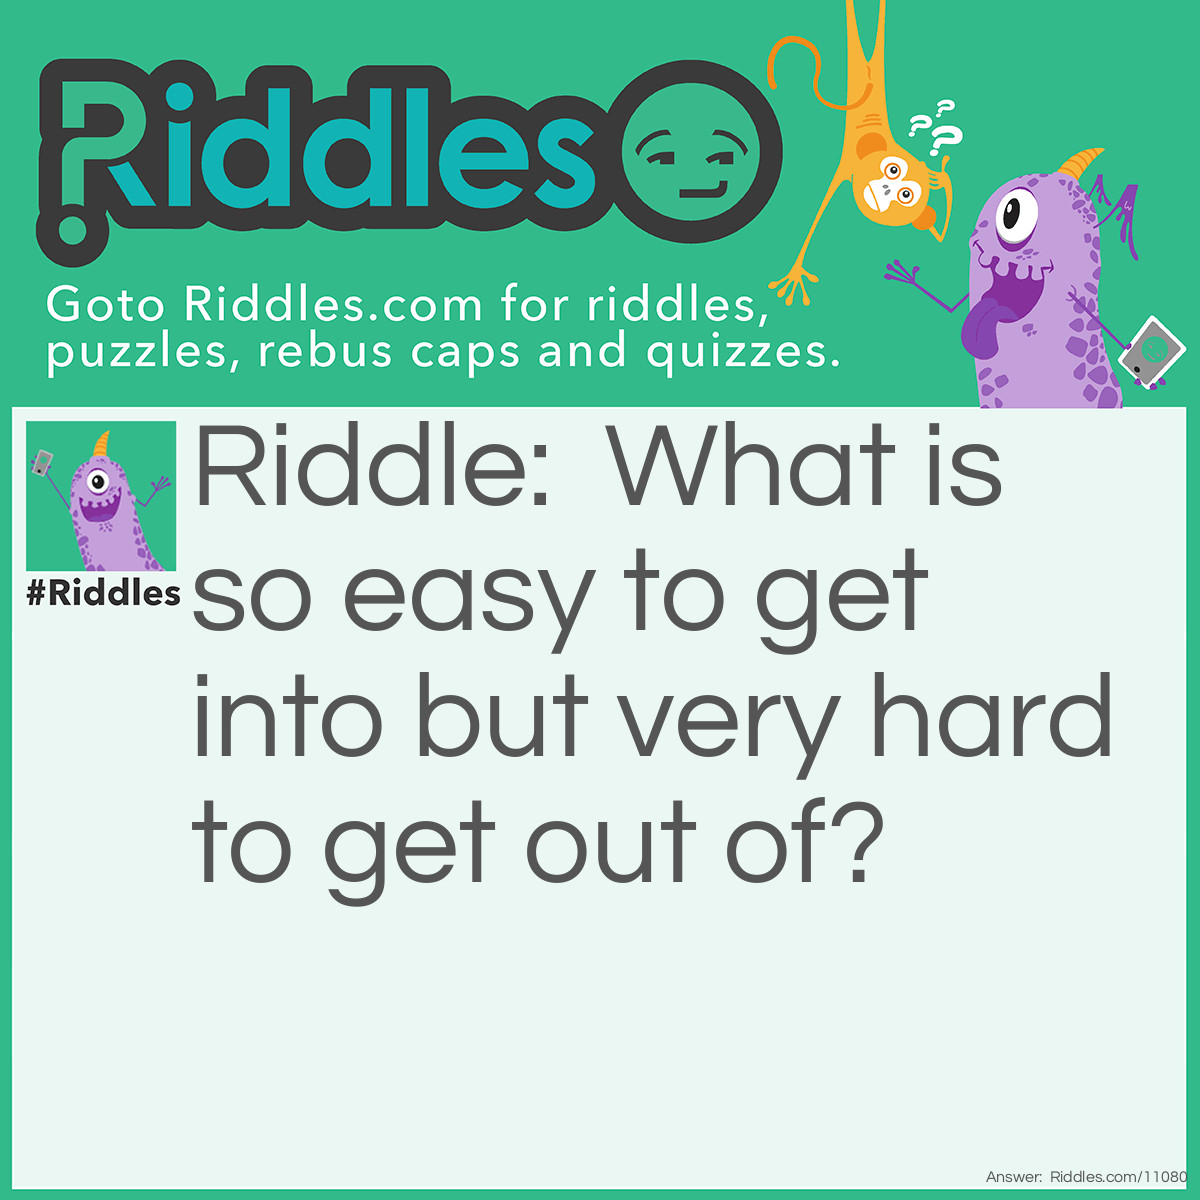 Riddle: What is so easy to get into but very hard to get out of? Answer: Trouble.